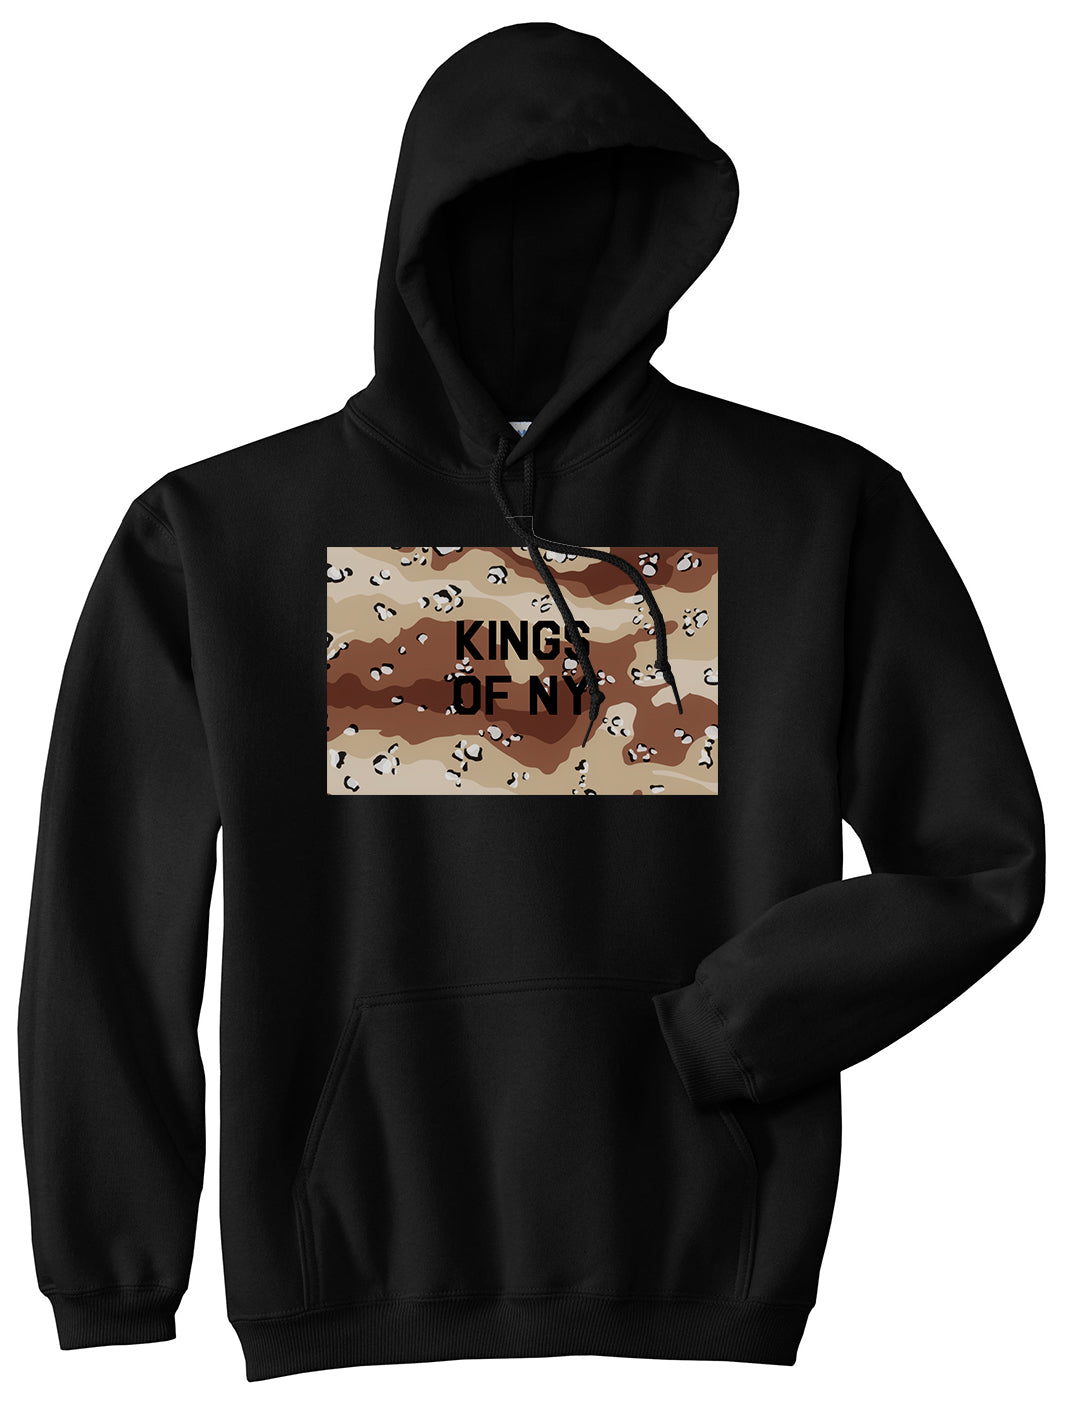 Desert Camo Army Pullover Hoodie in Black